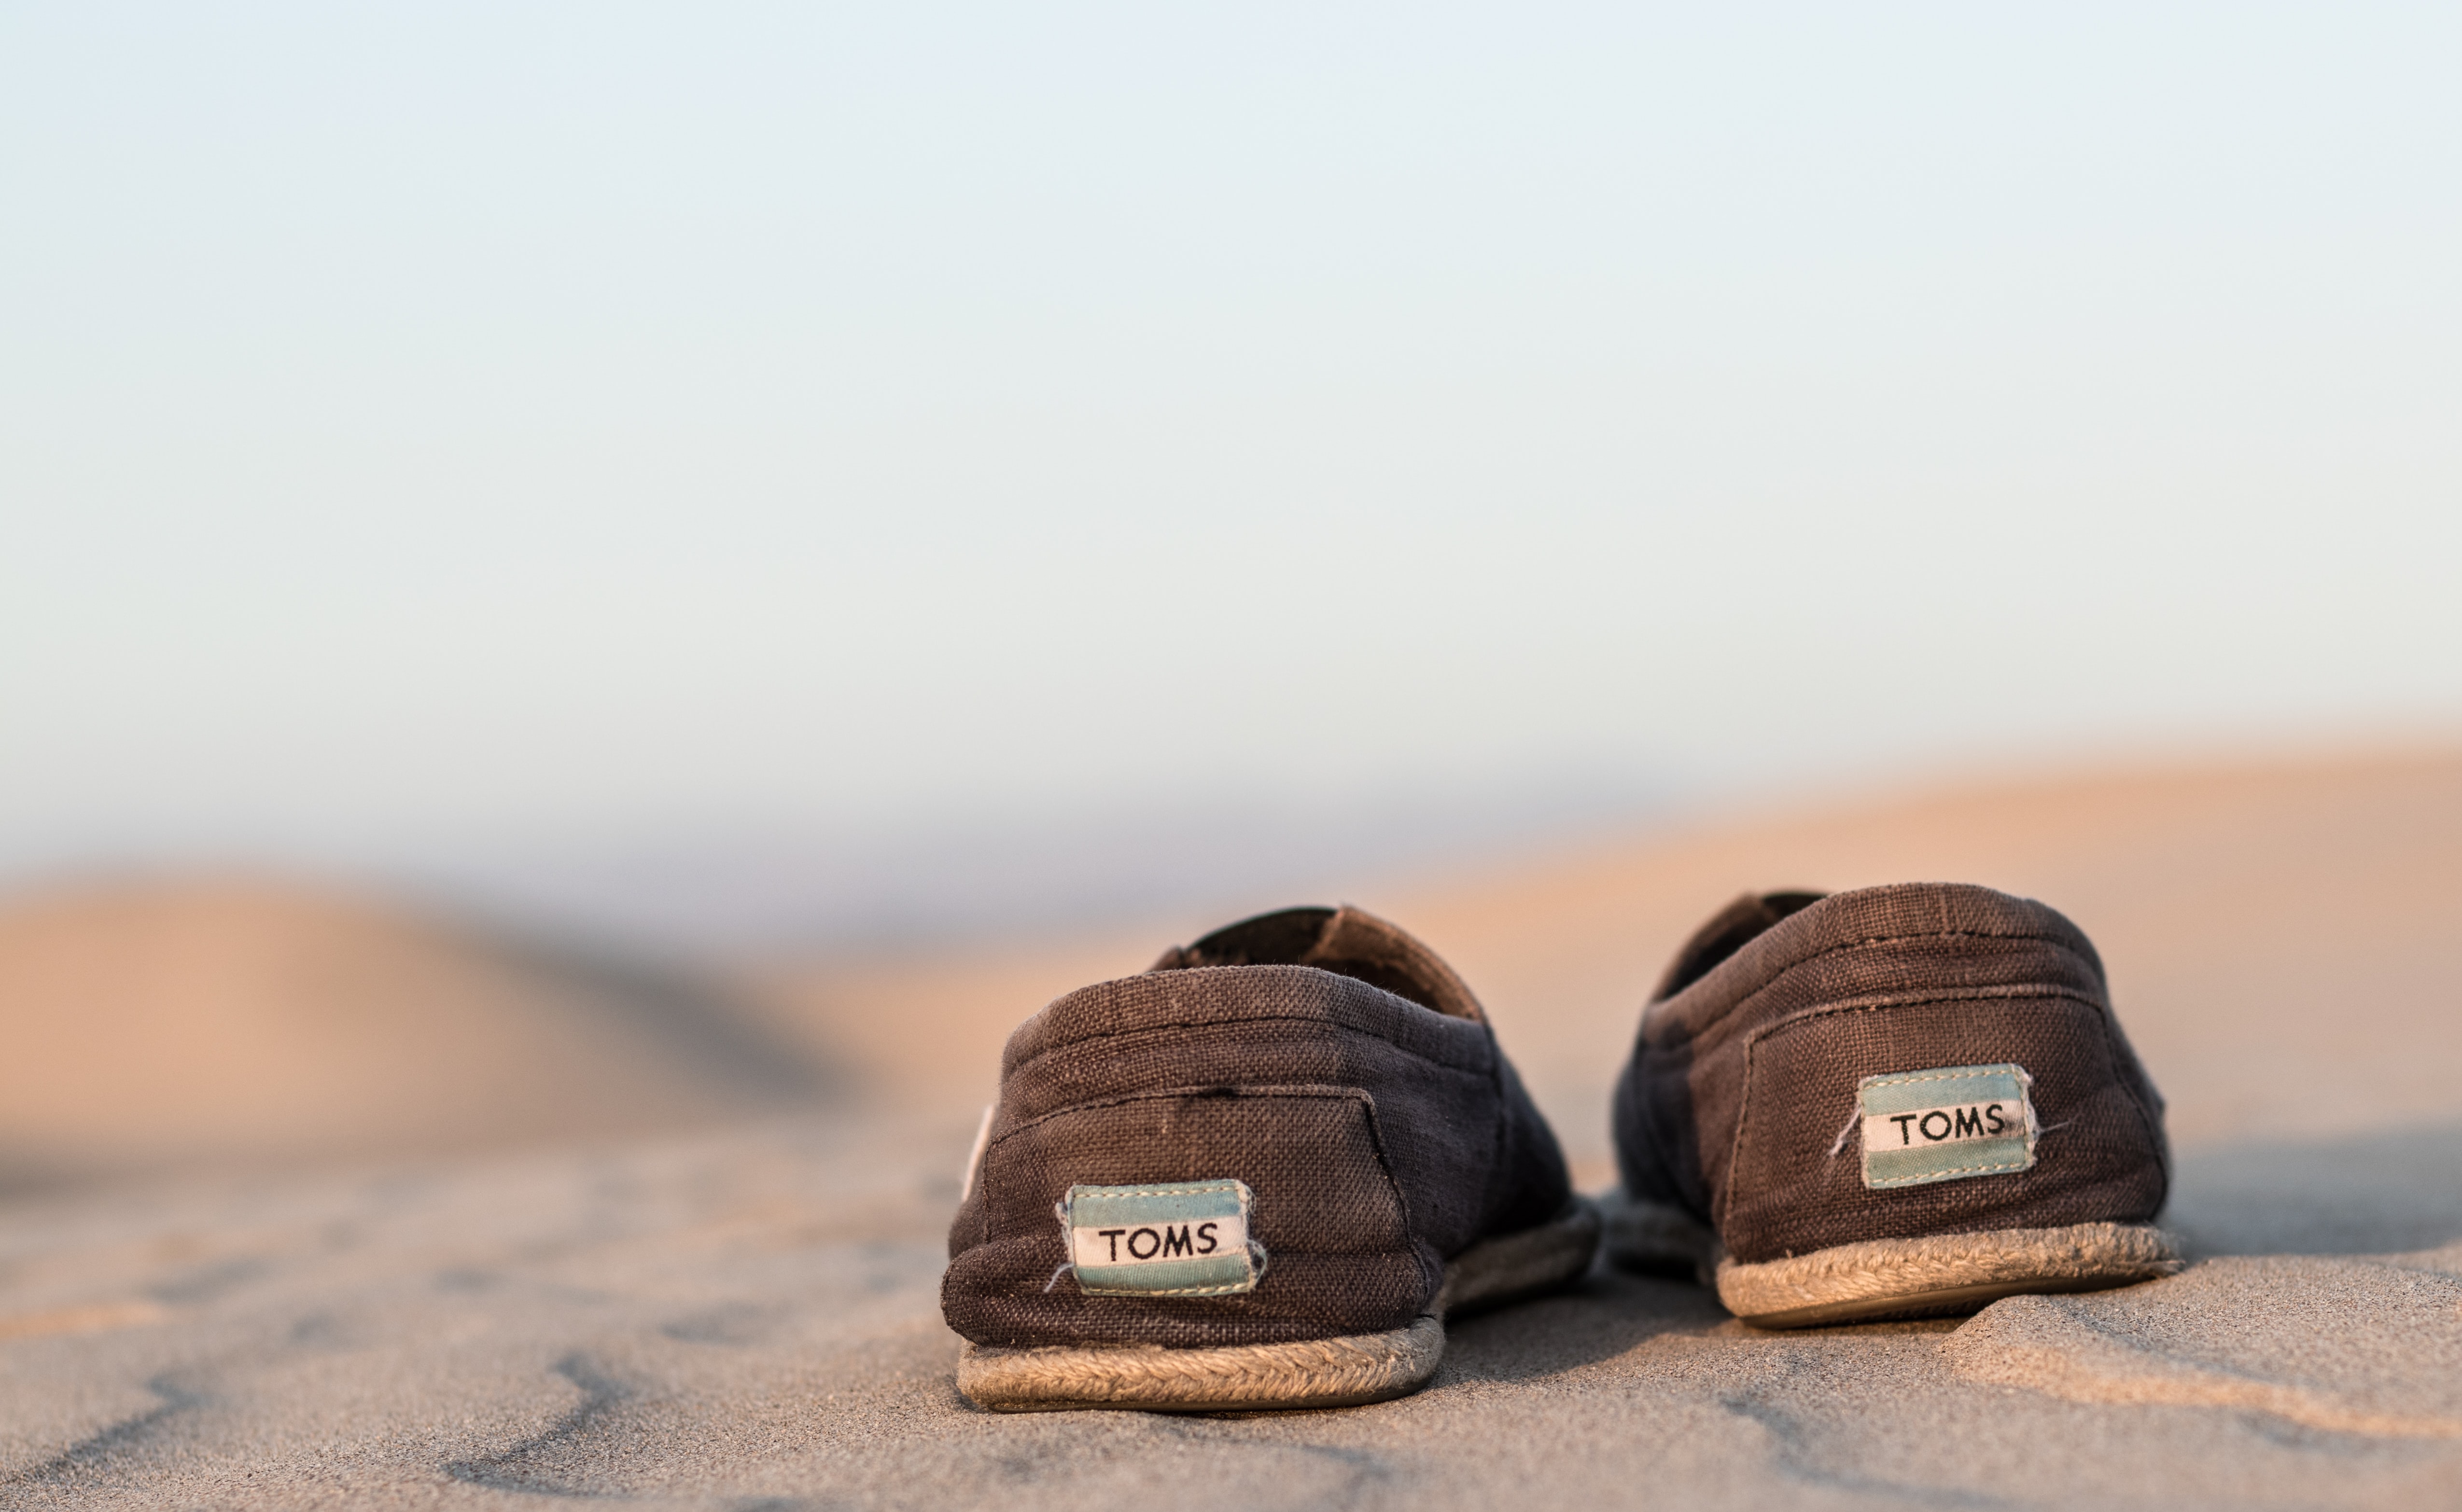 A pair of Toms shoes in the desert.